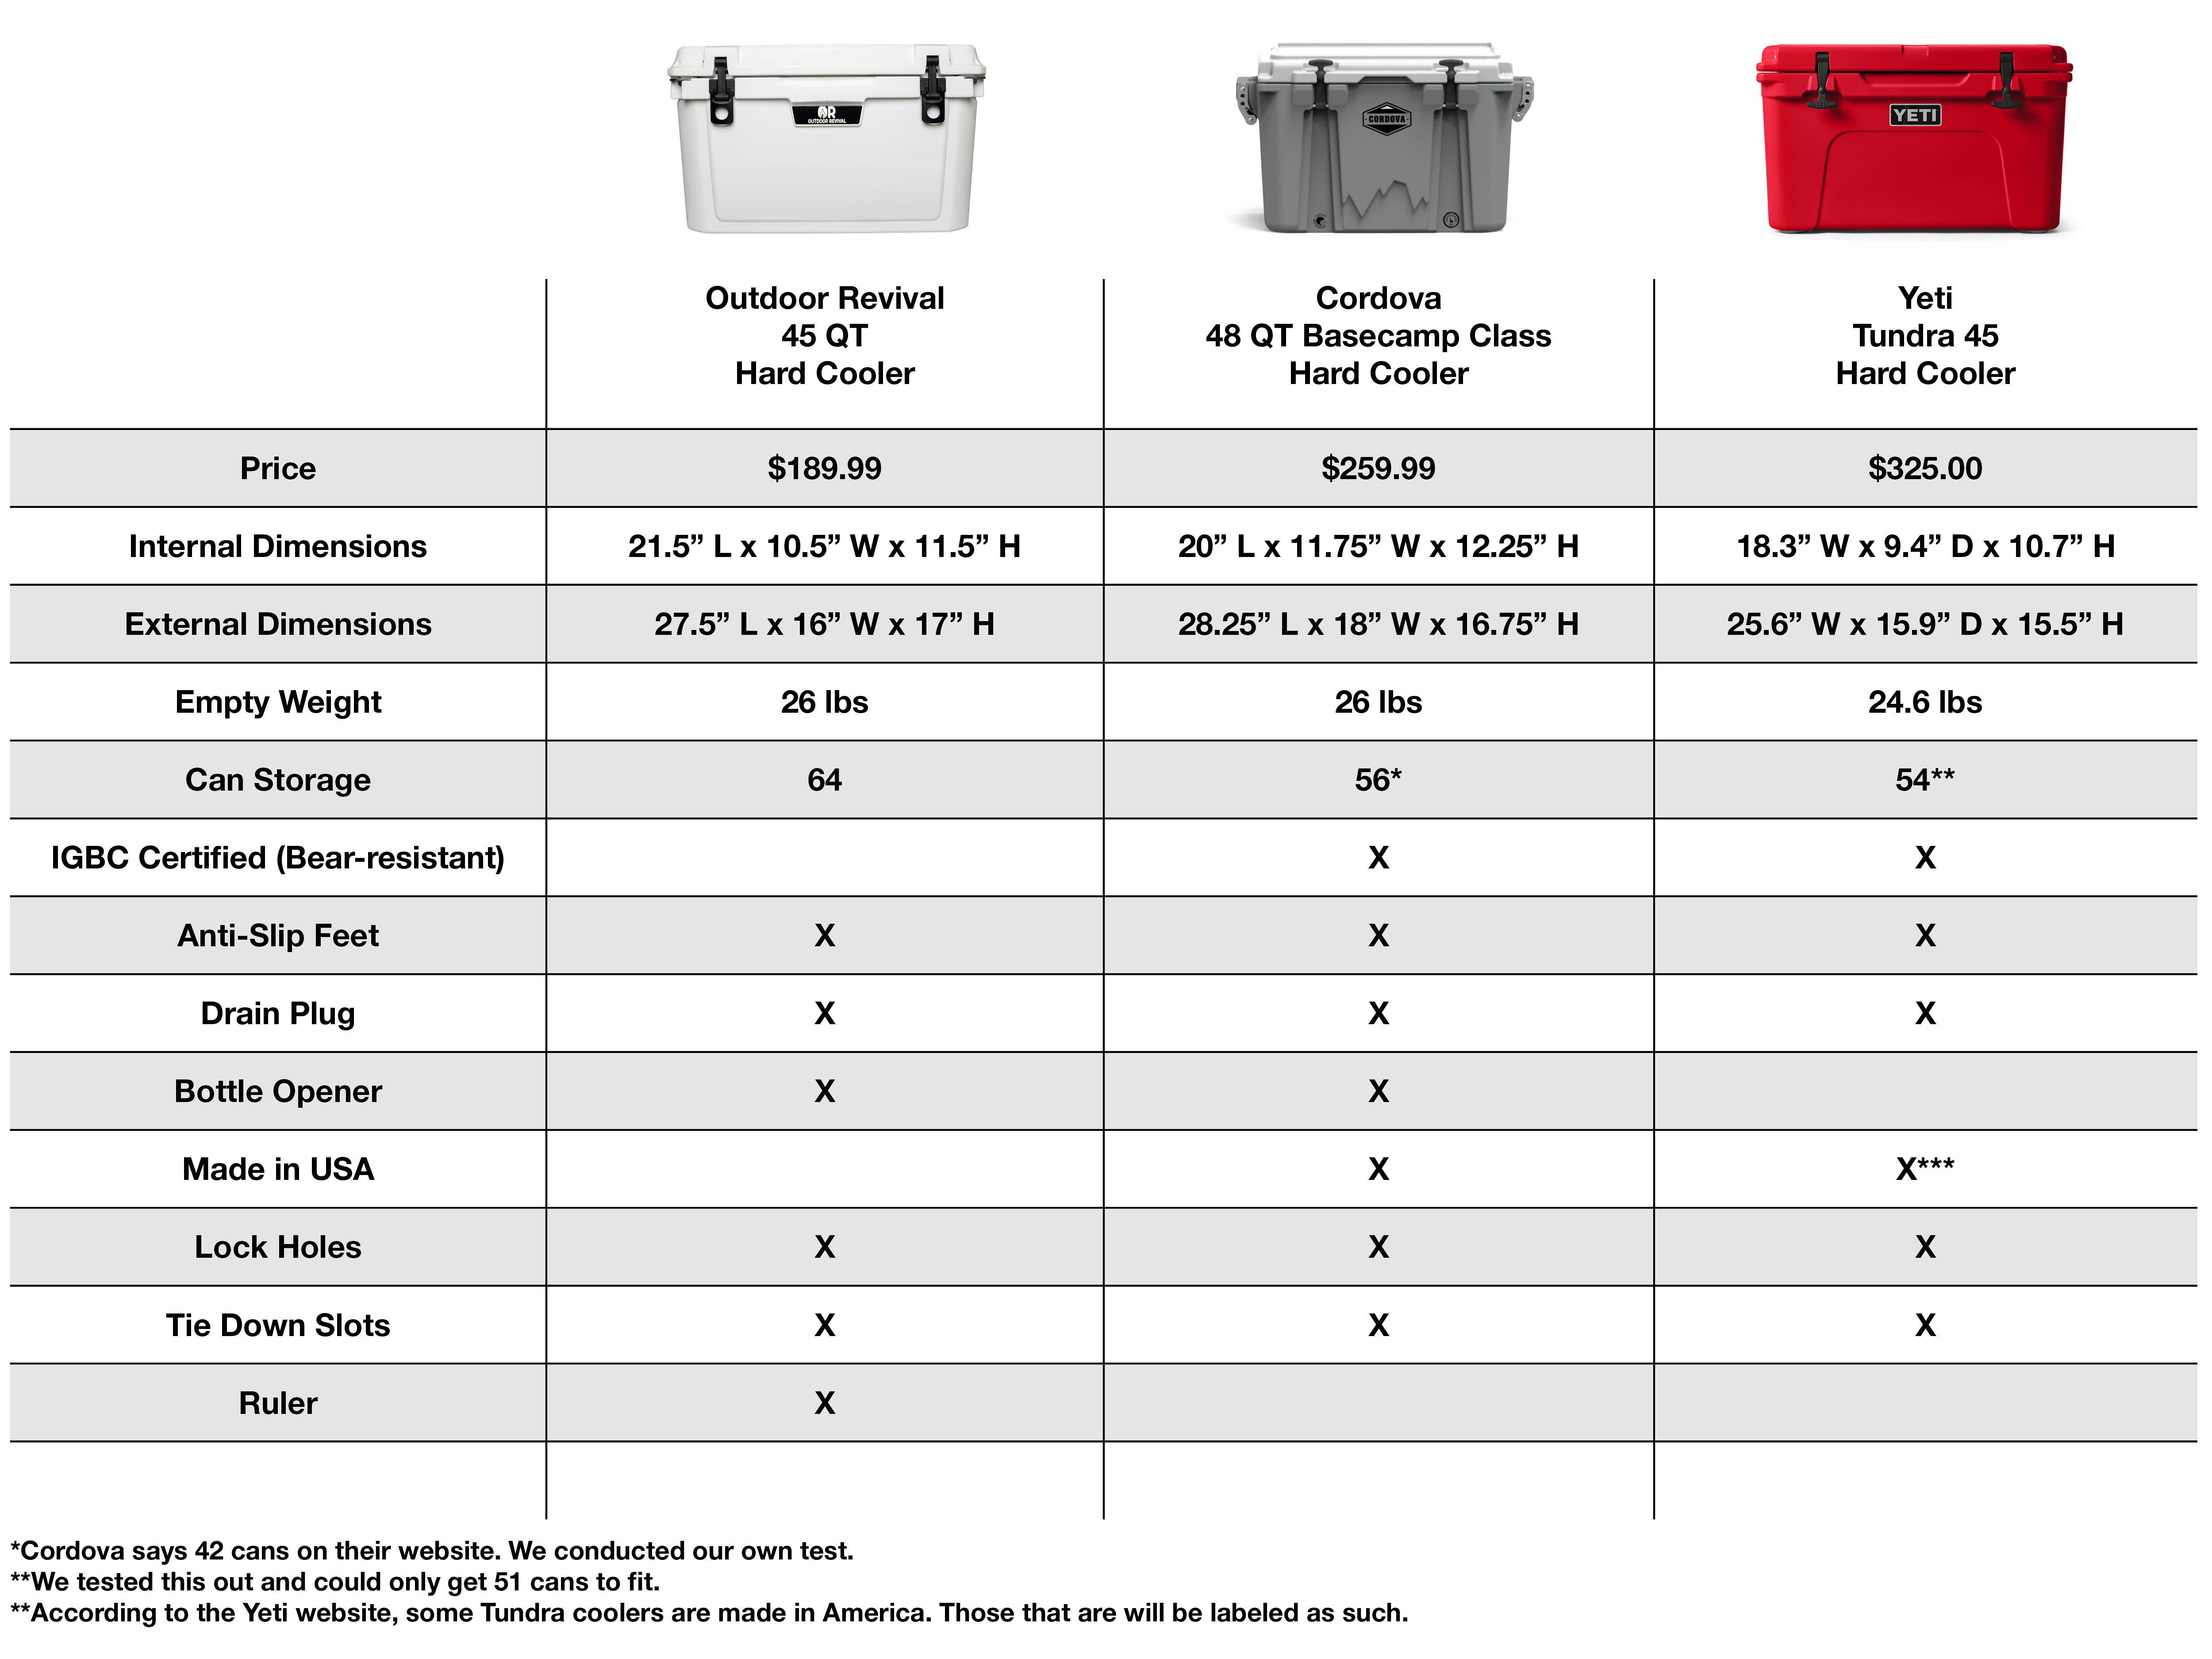 A chart outlining some of the differences between the Outdoor Revival, Cordova, and Yeti coolers